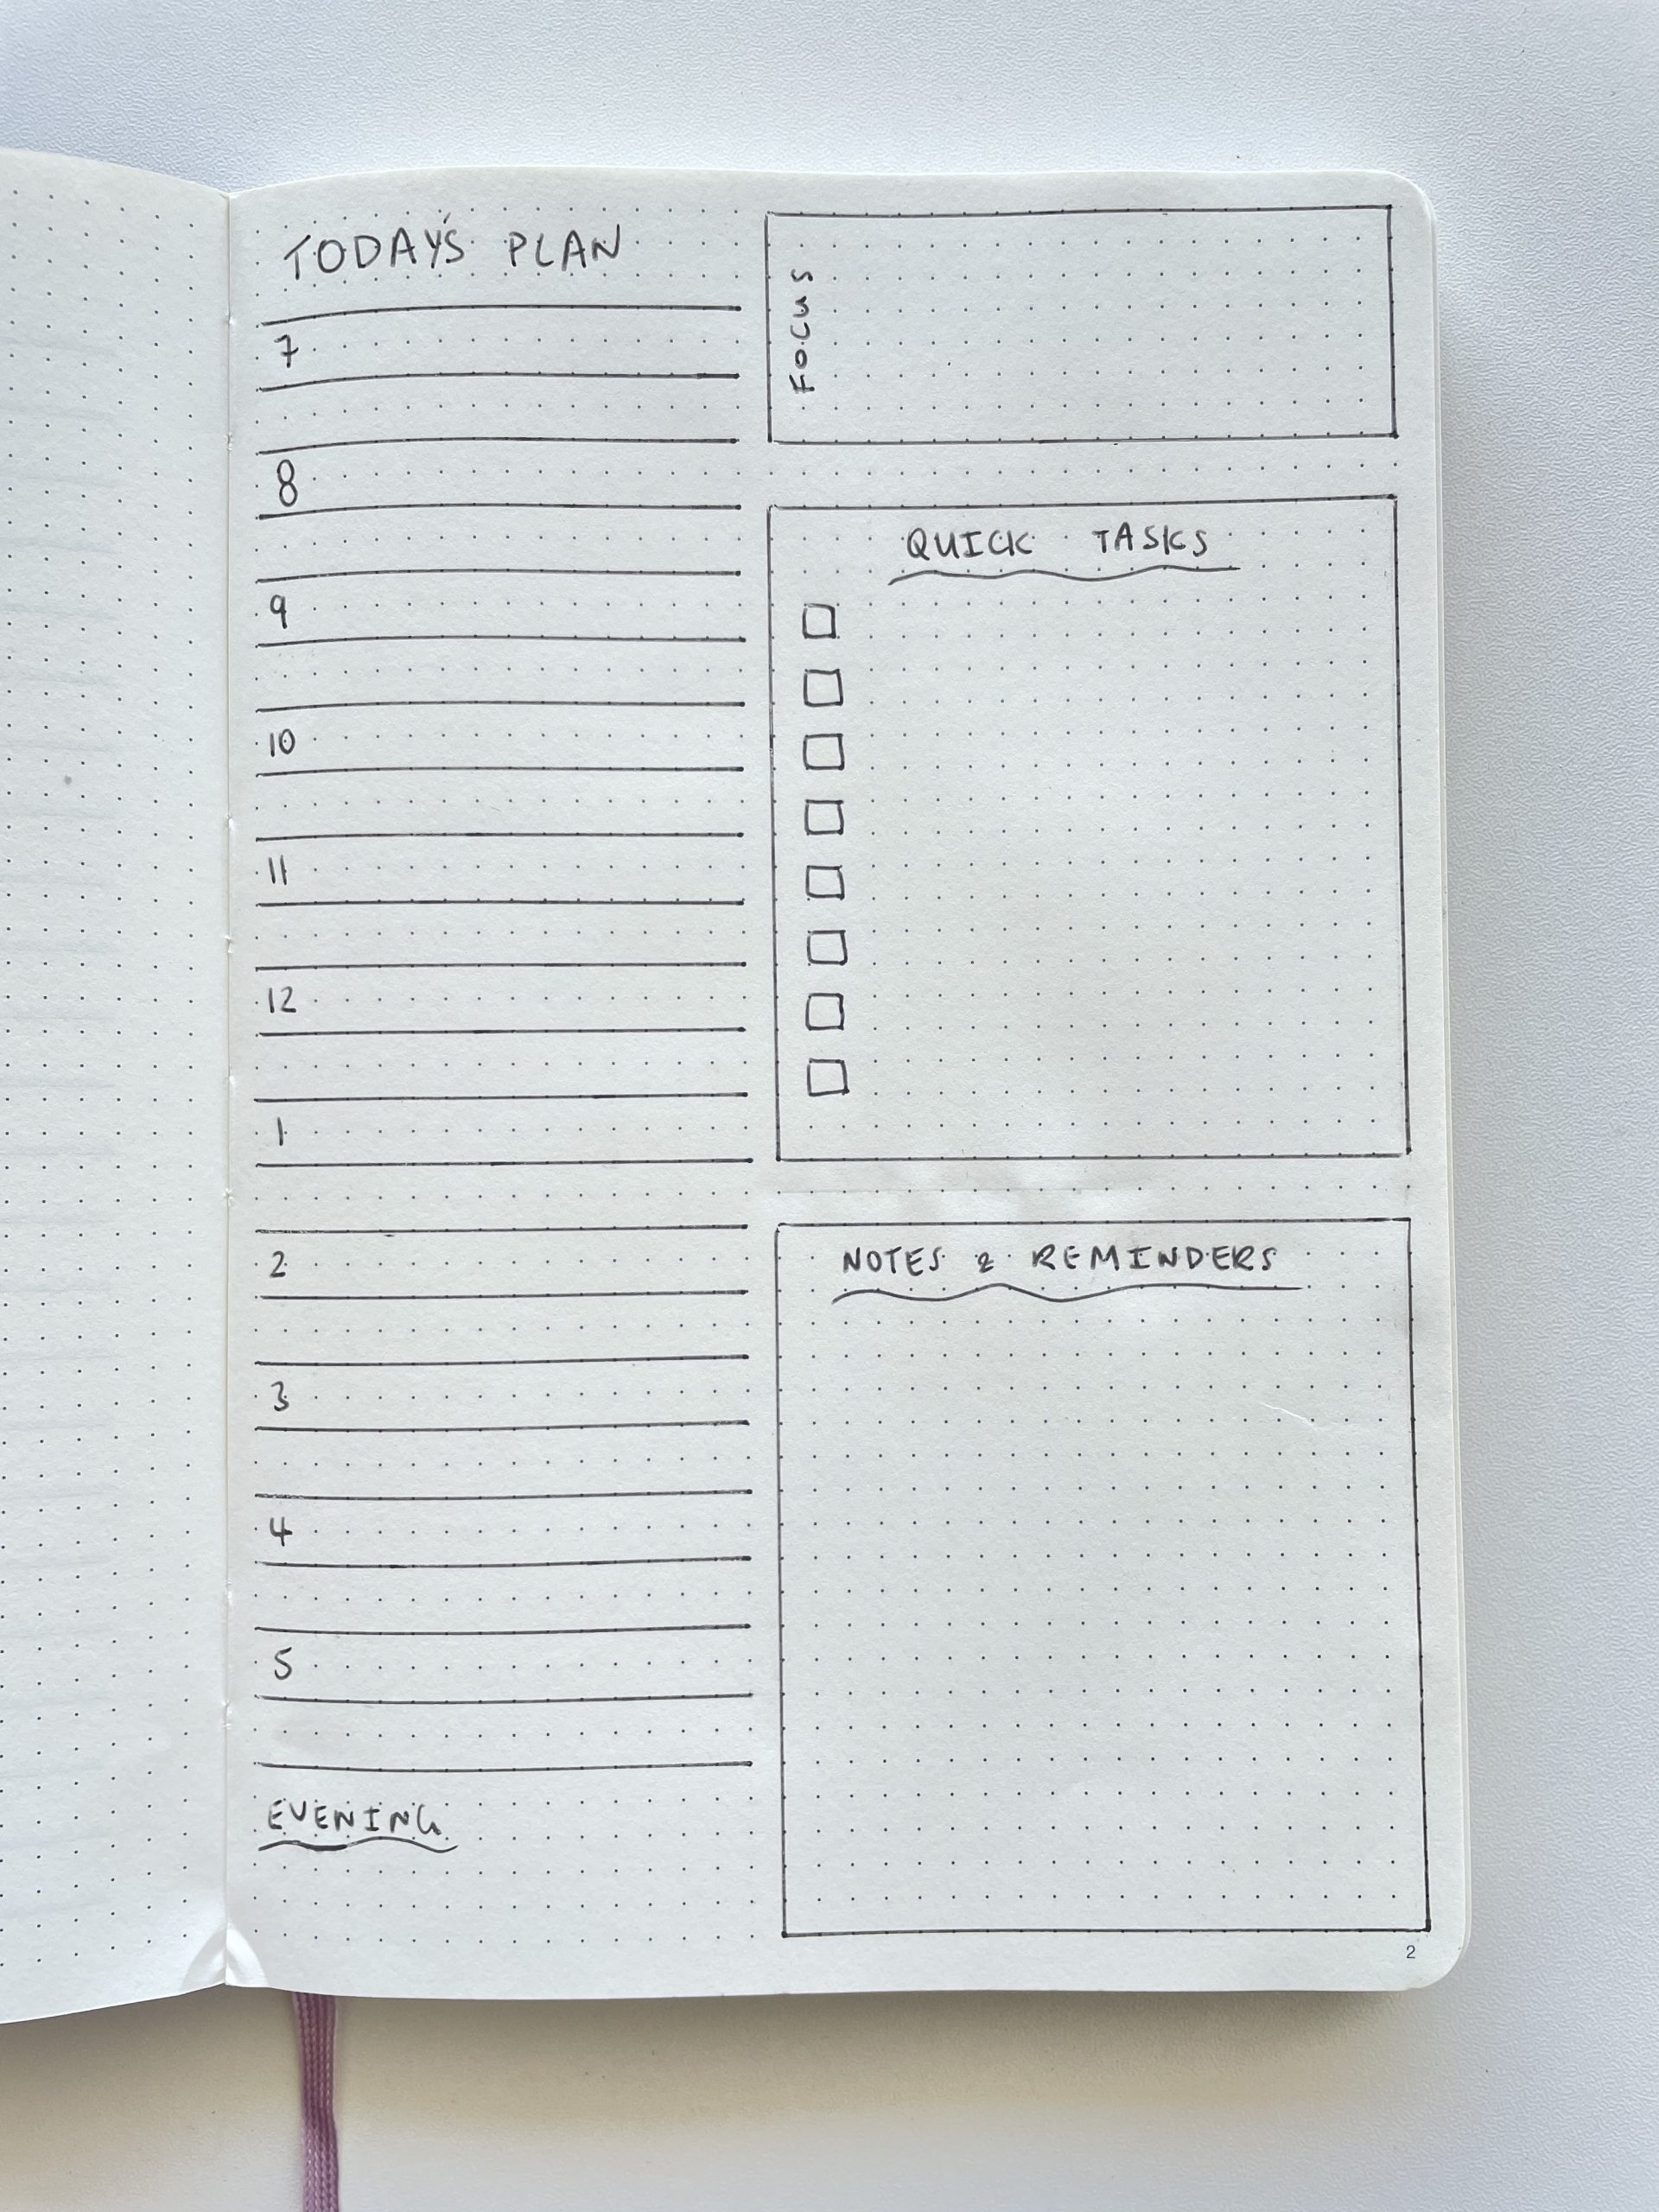 bullet journal daily spread you can draw fast minimalist quick easy simple 7am to 5pm notes pomodoro quick tasks focus example template